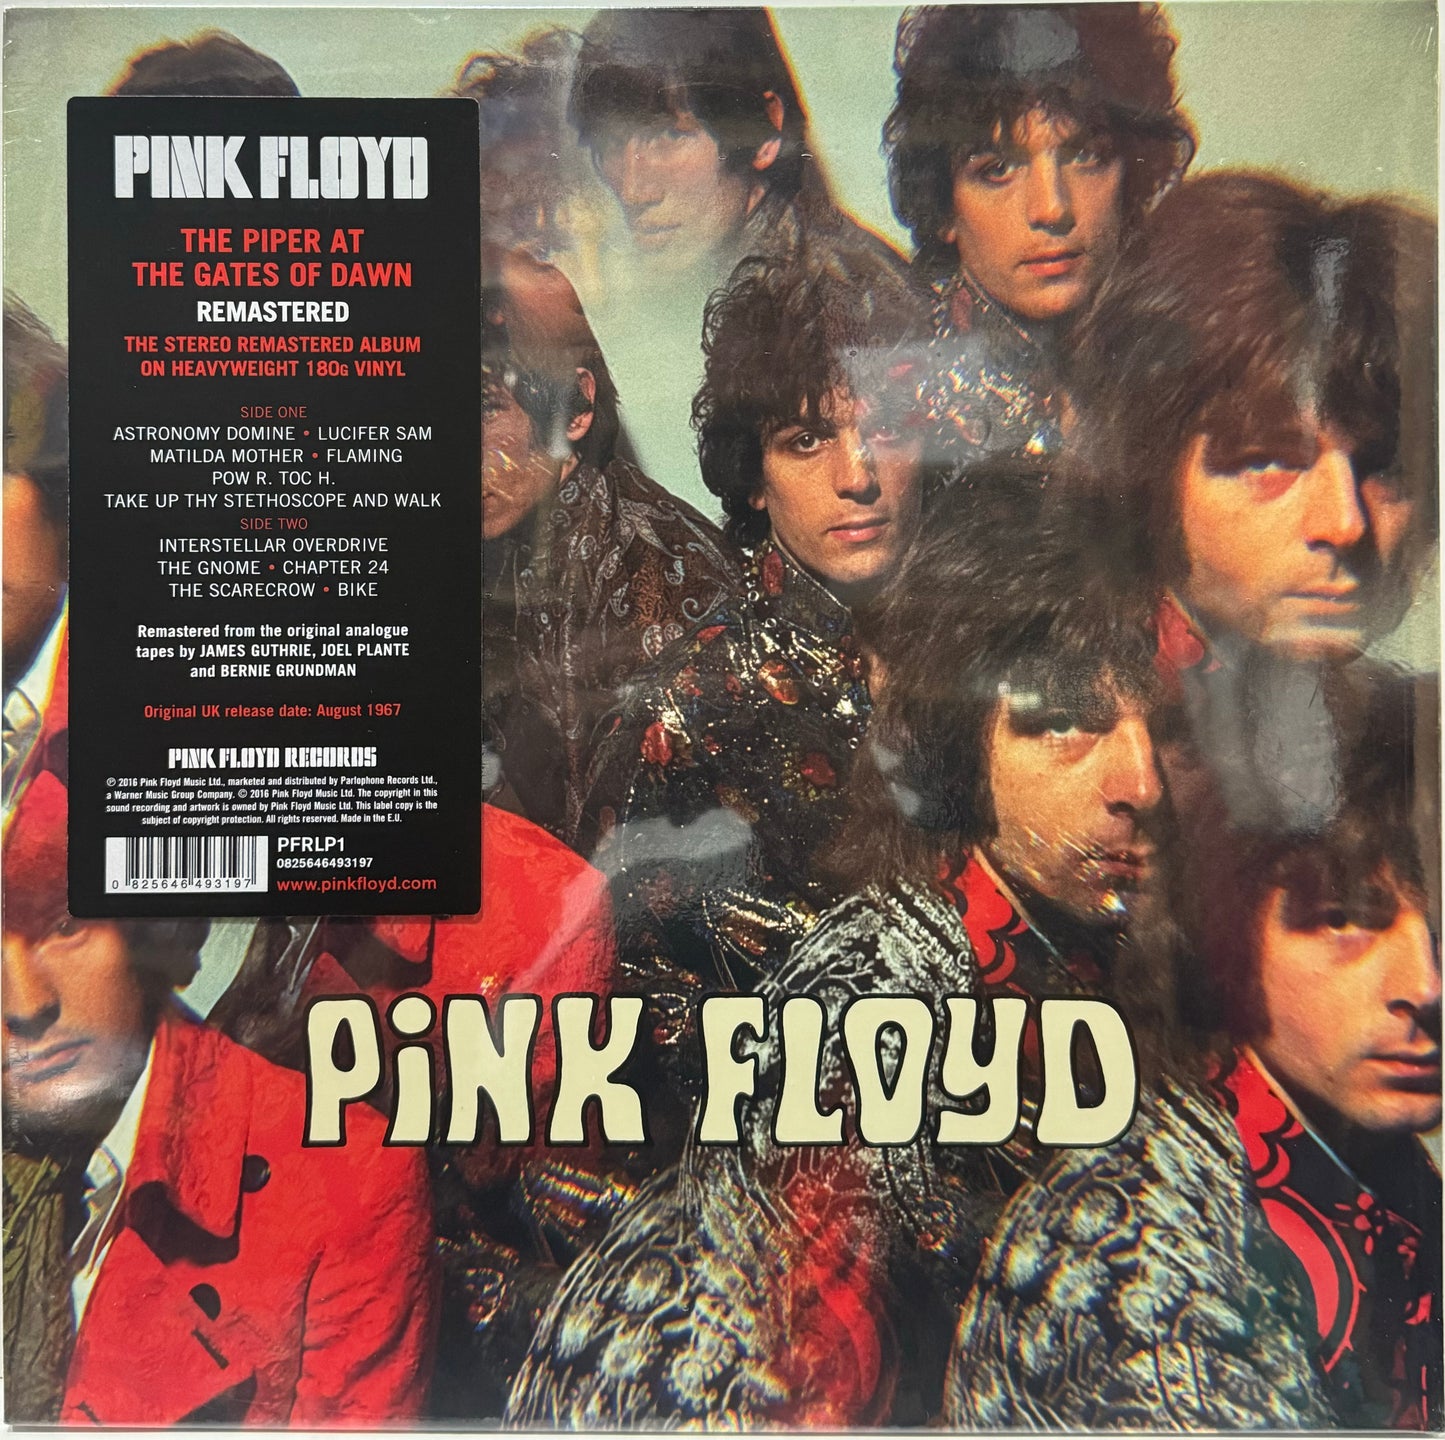 PINK FLOYD - THE PIPER AT THE GATES OF DAWN  LP